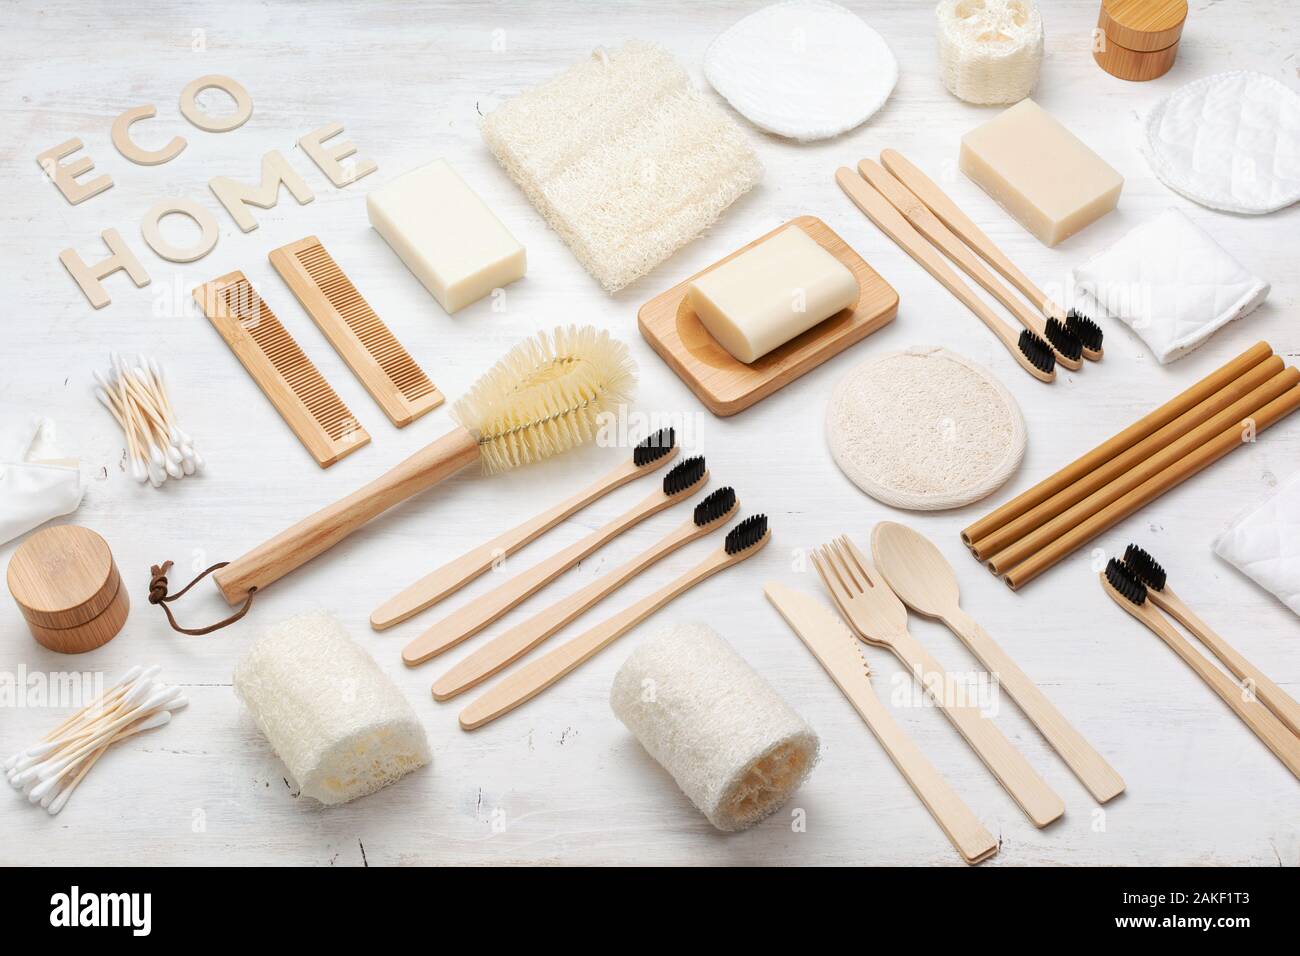 Eco living. Creative flatlay with natural biodegradable accessories. Bamboo toothbrushes, handmade soap shampoo bars, cotton buds pads, hygiene products luffa on white, top view Stock Photo